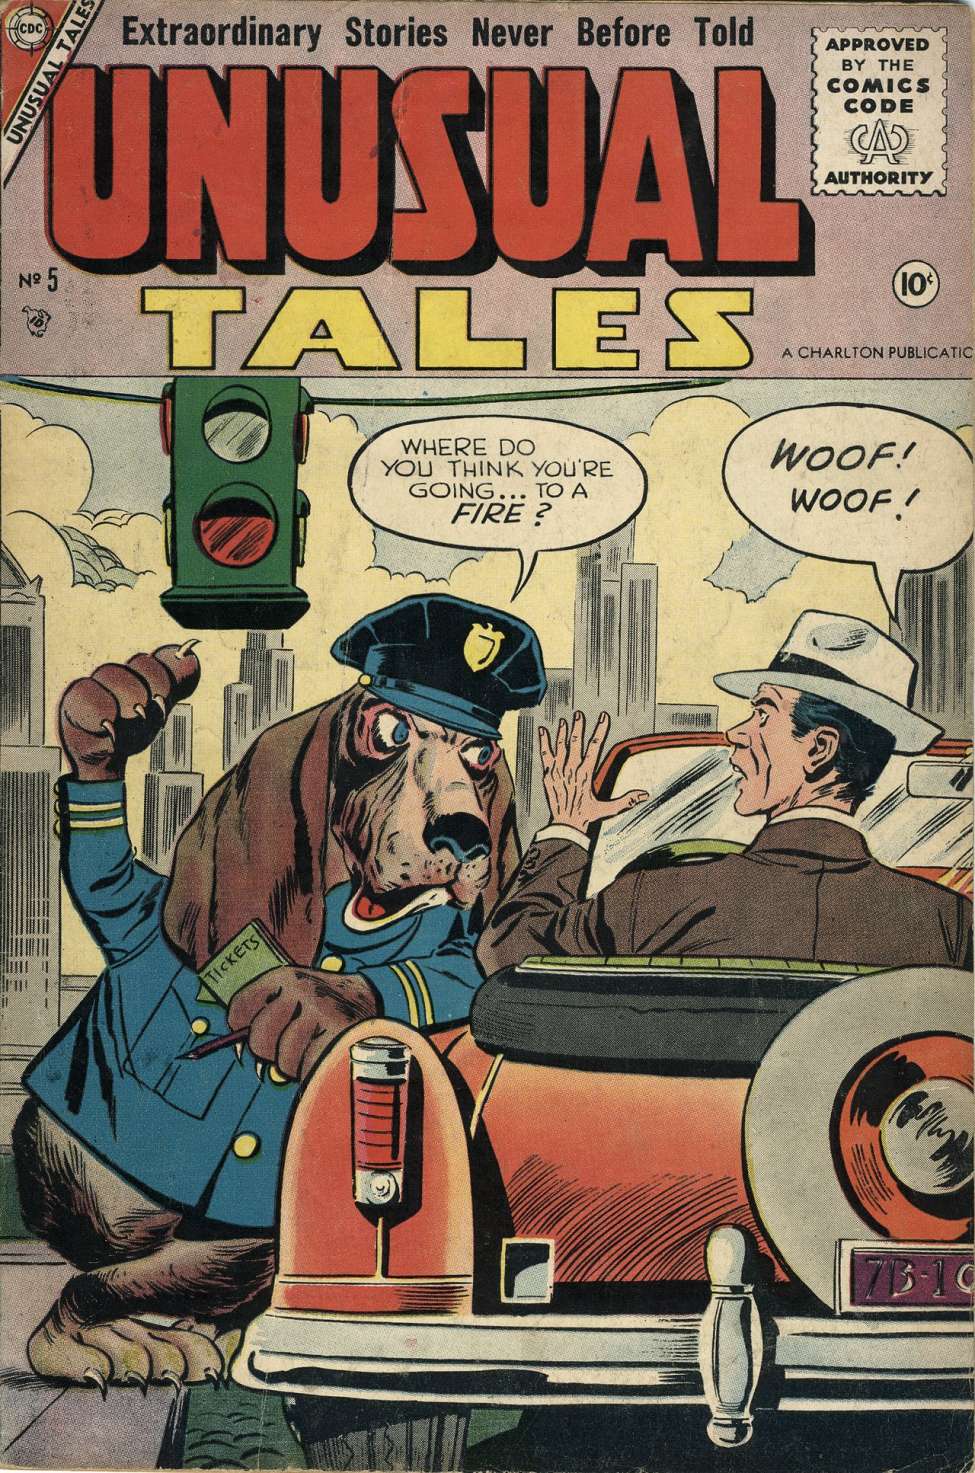 Book Cover For Unusual Tales 5